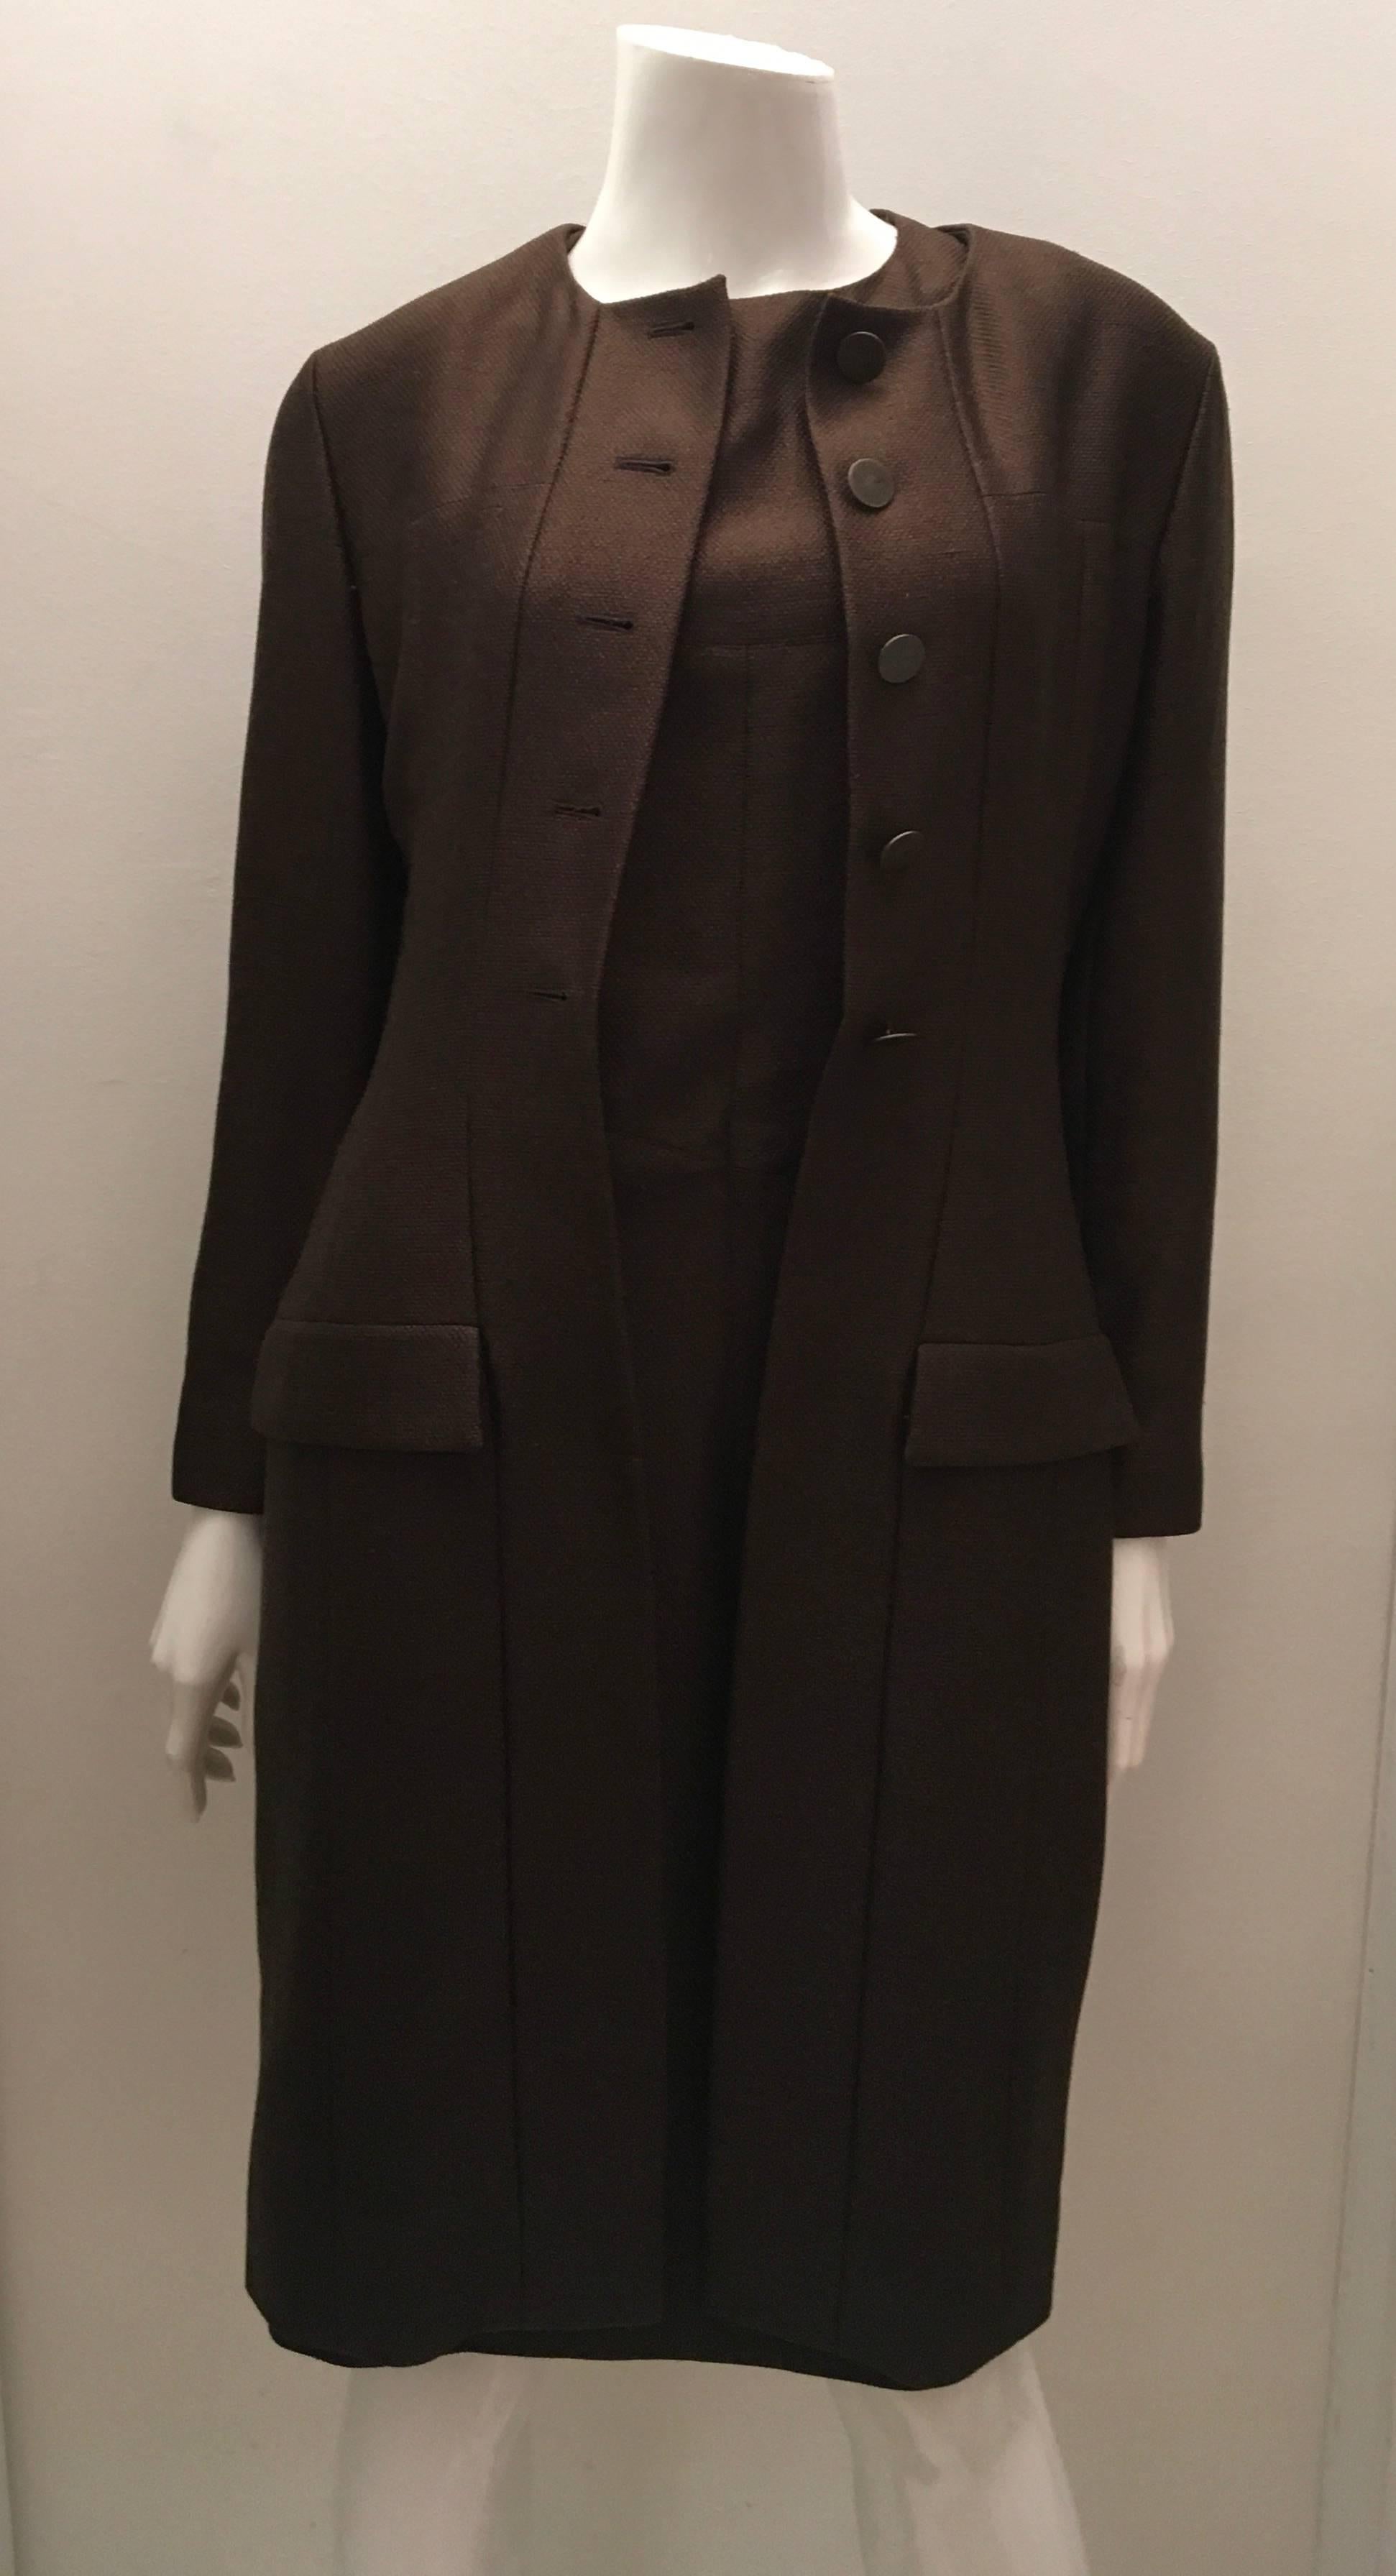 Black Chanel Coat w/ Matching Dress - Mint Condition - Absolutely Flawless For Sale